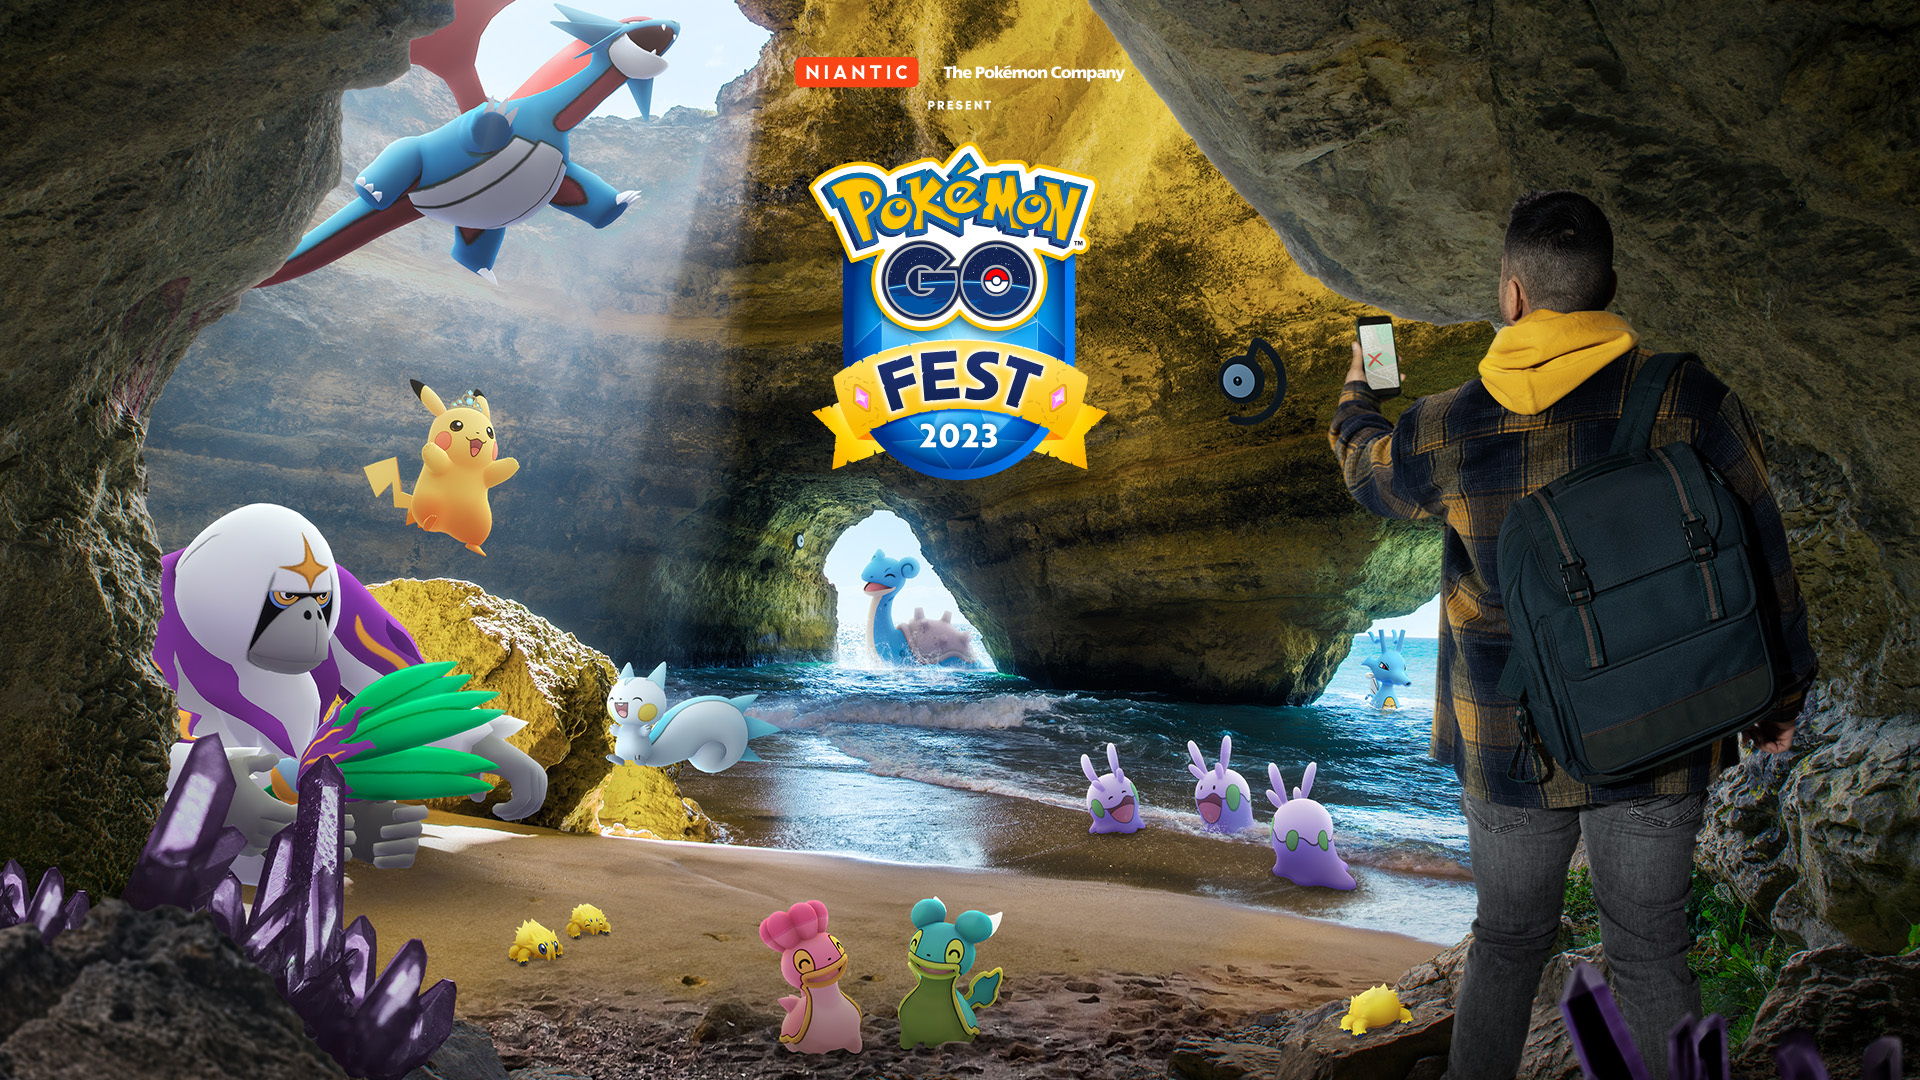 Pokémon Go Fest 2023 to feature Diancie, new Shinies, and more hidden